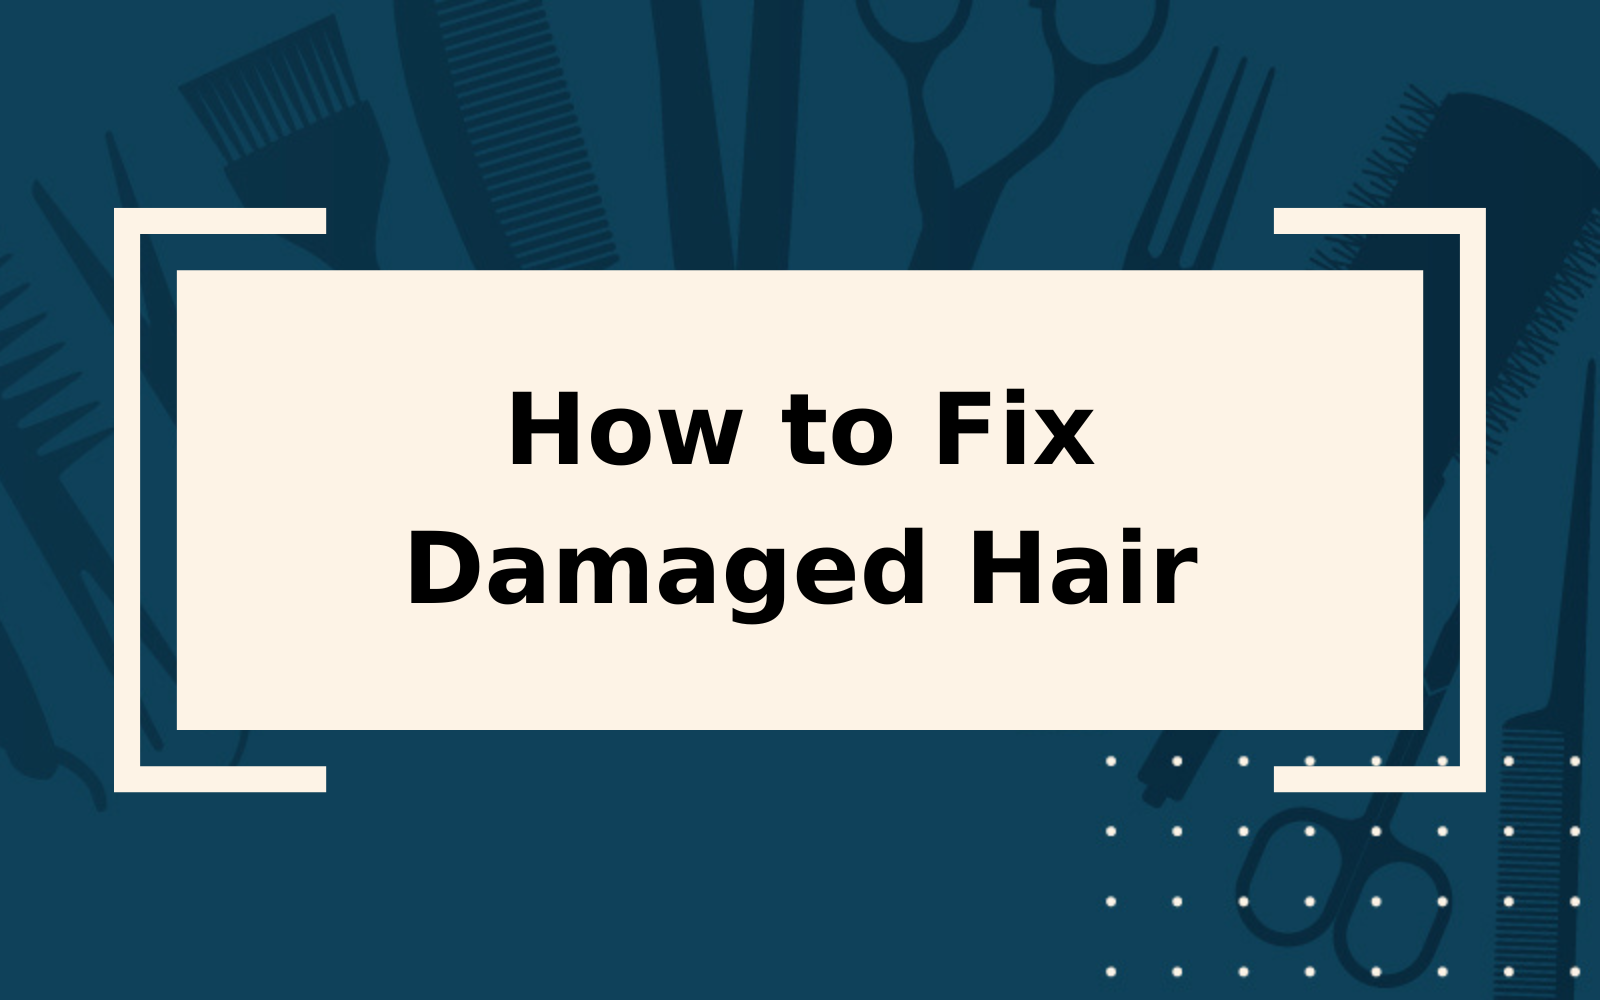 How To Fix Damaged Hair | 10 Things to Try in 2023